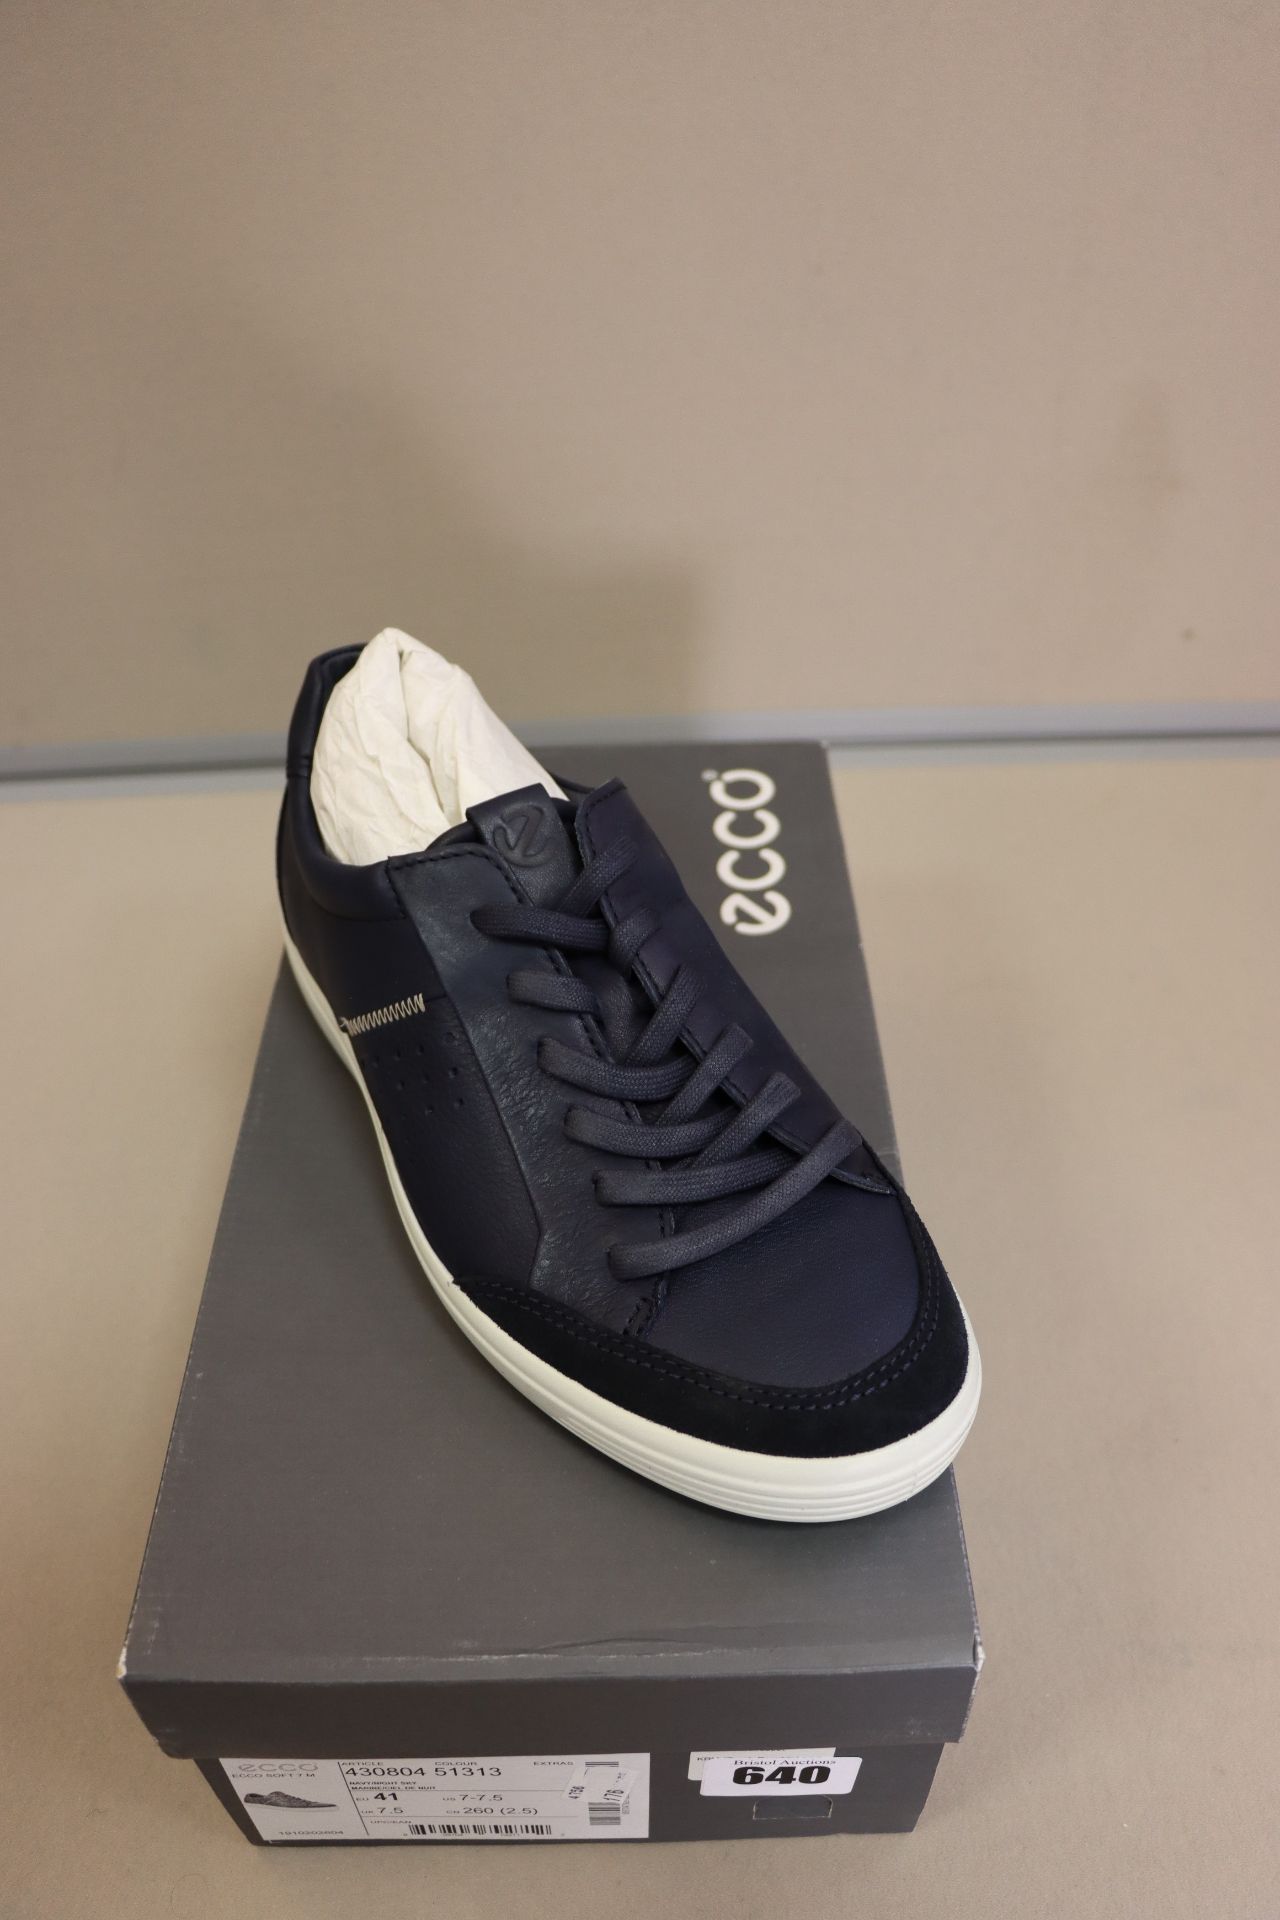 One as new Ecco Soft 7 M navy/night sky shoes size UK 7.5 (430804).